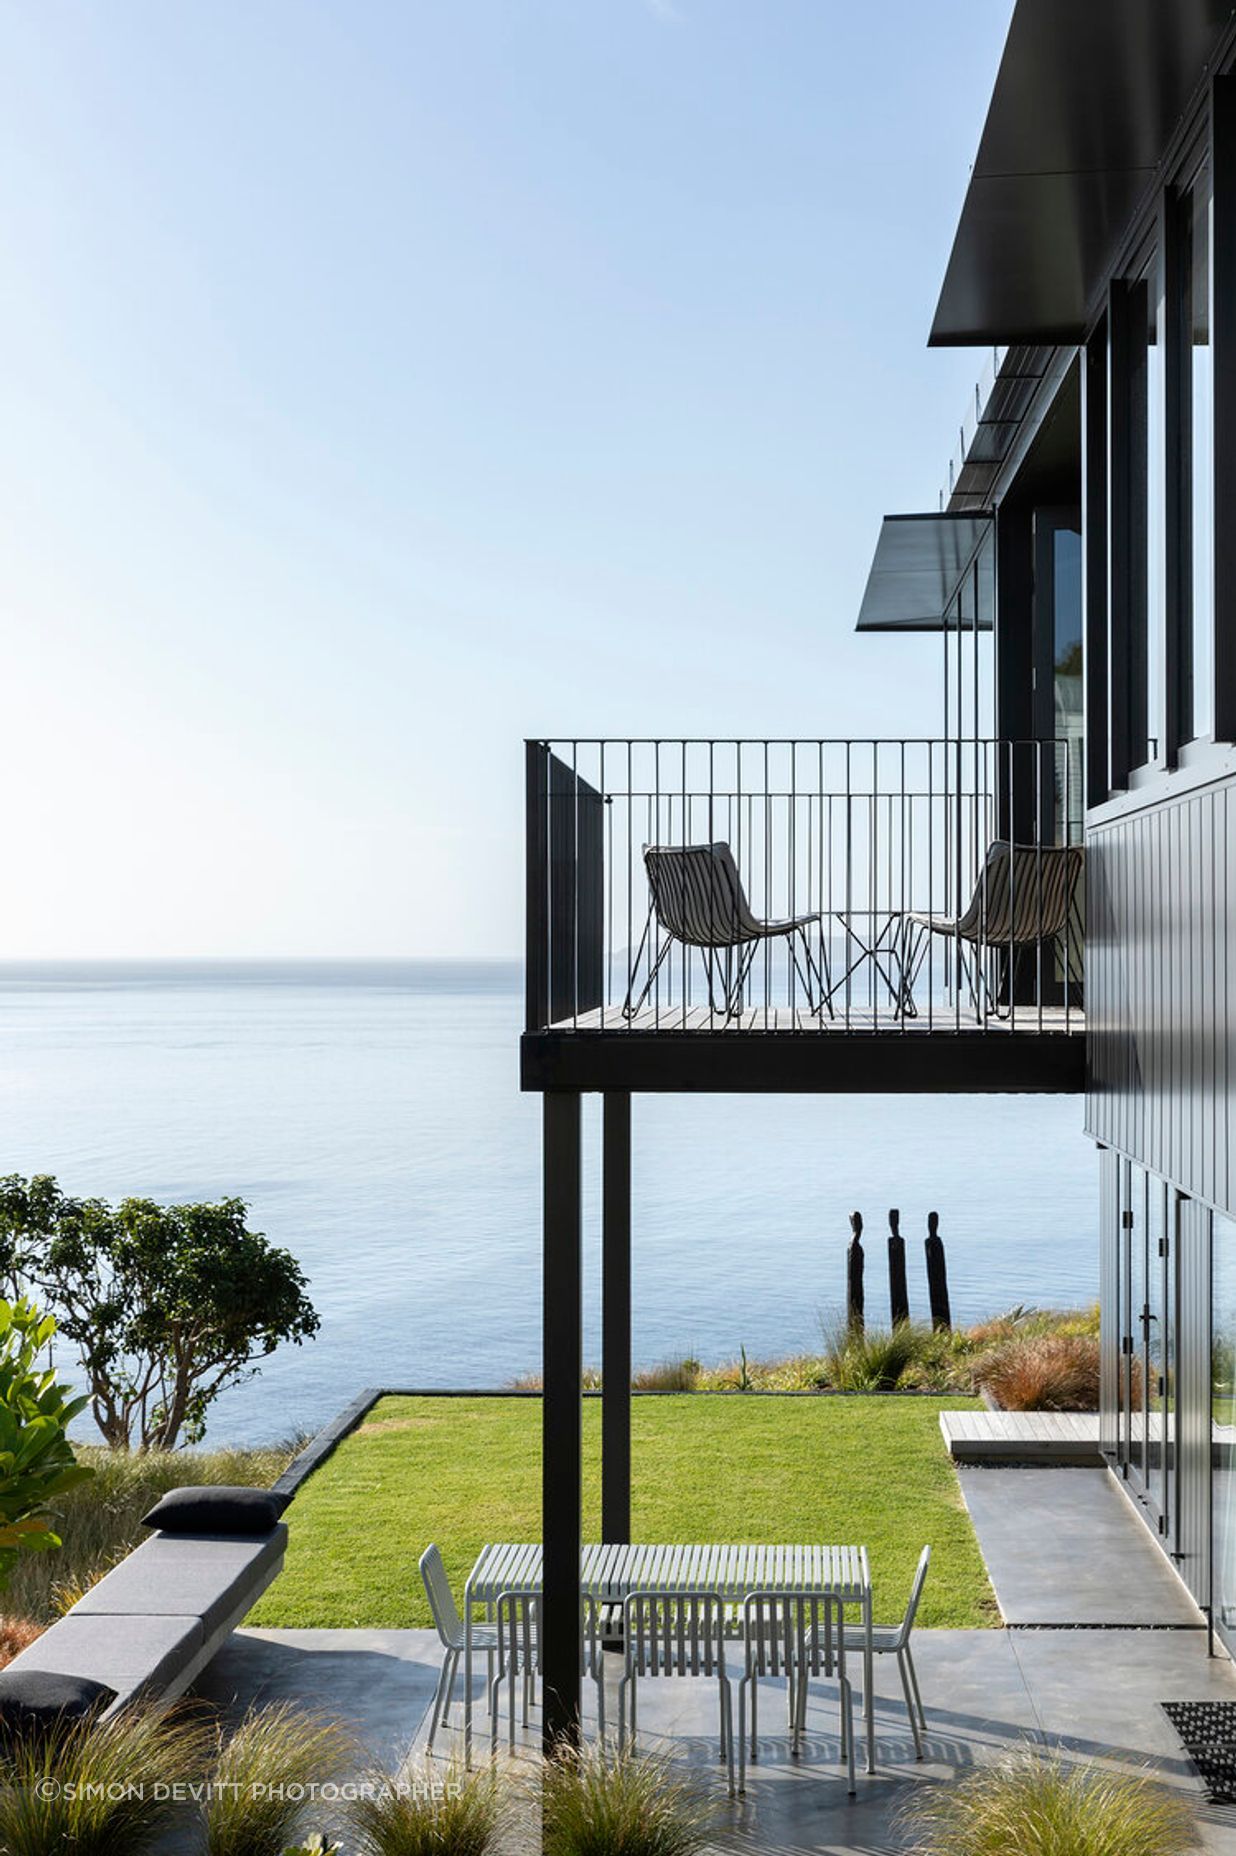 The floorplates are offset and arranged to direct views out to the sea from every room.